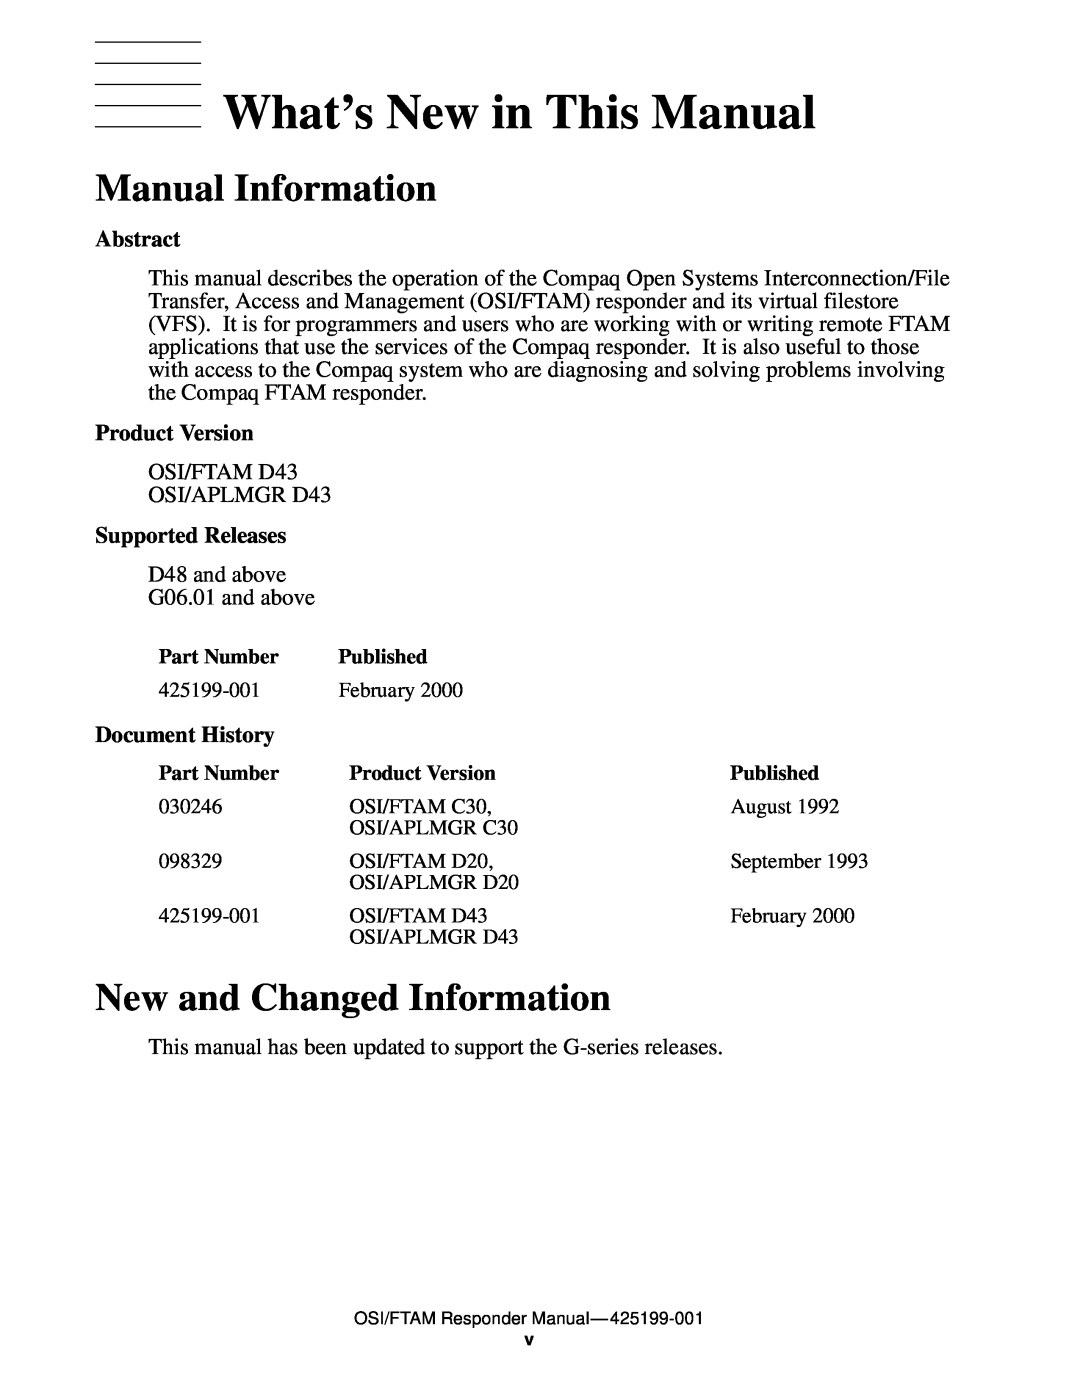 Compaq OSI/FTAM D43 What’s New in This Manual, Manual Information, New and Changed Information, Abstract, Product Version 